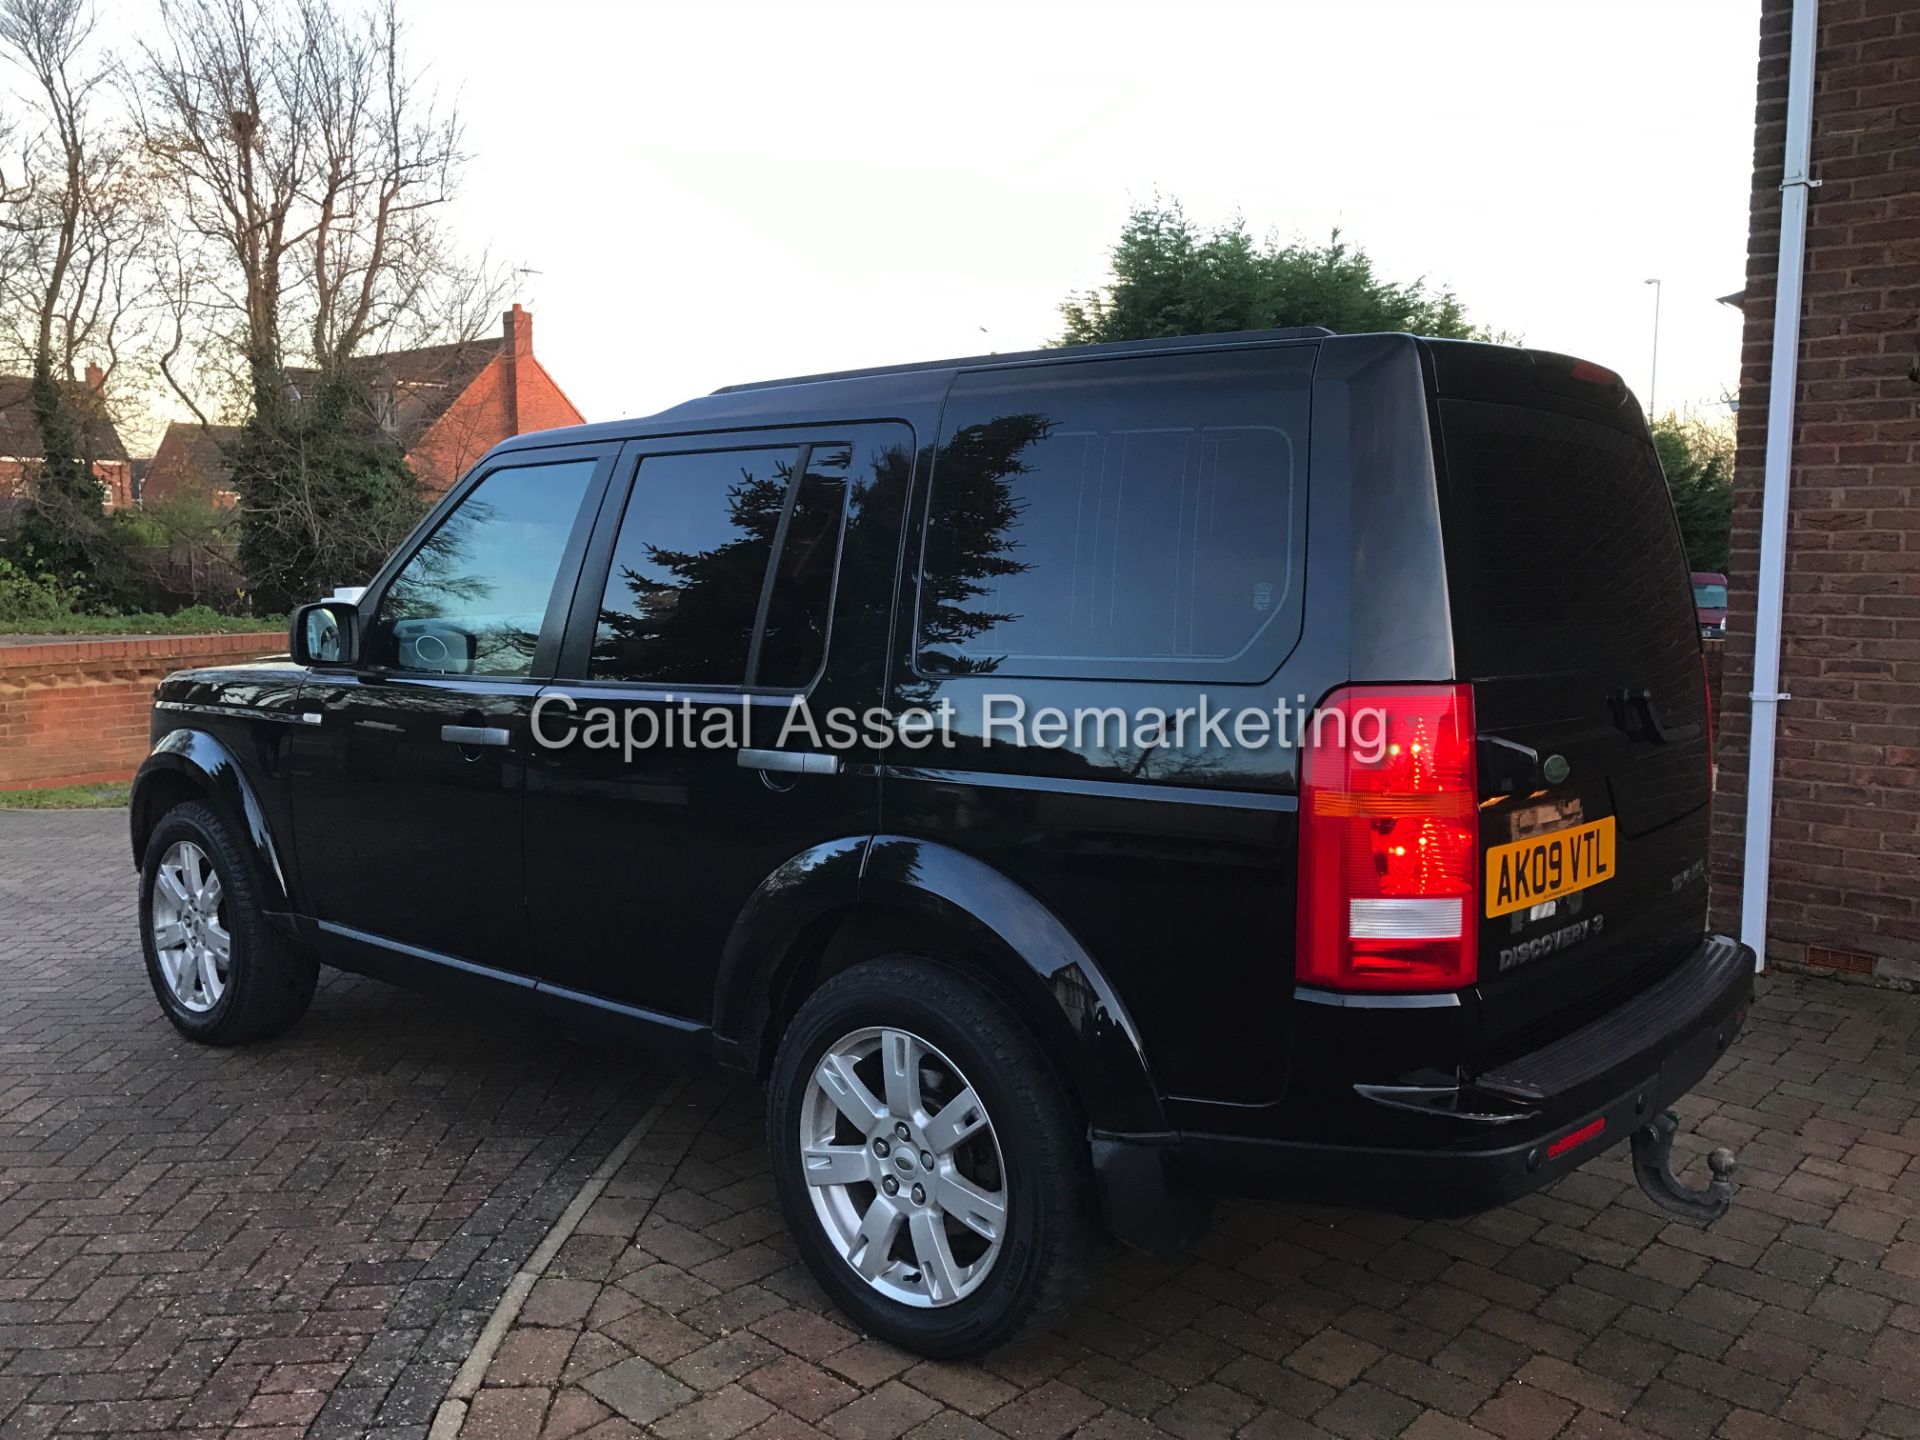 LANDROVER DISCOVERY 3 "TDV6" AUTO - (BLACK EDITION) - 09 REG - SAT NAV - LEATHER - 7 SEATER - WOW!! - Image 7 of 30